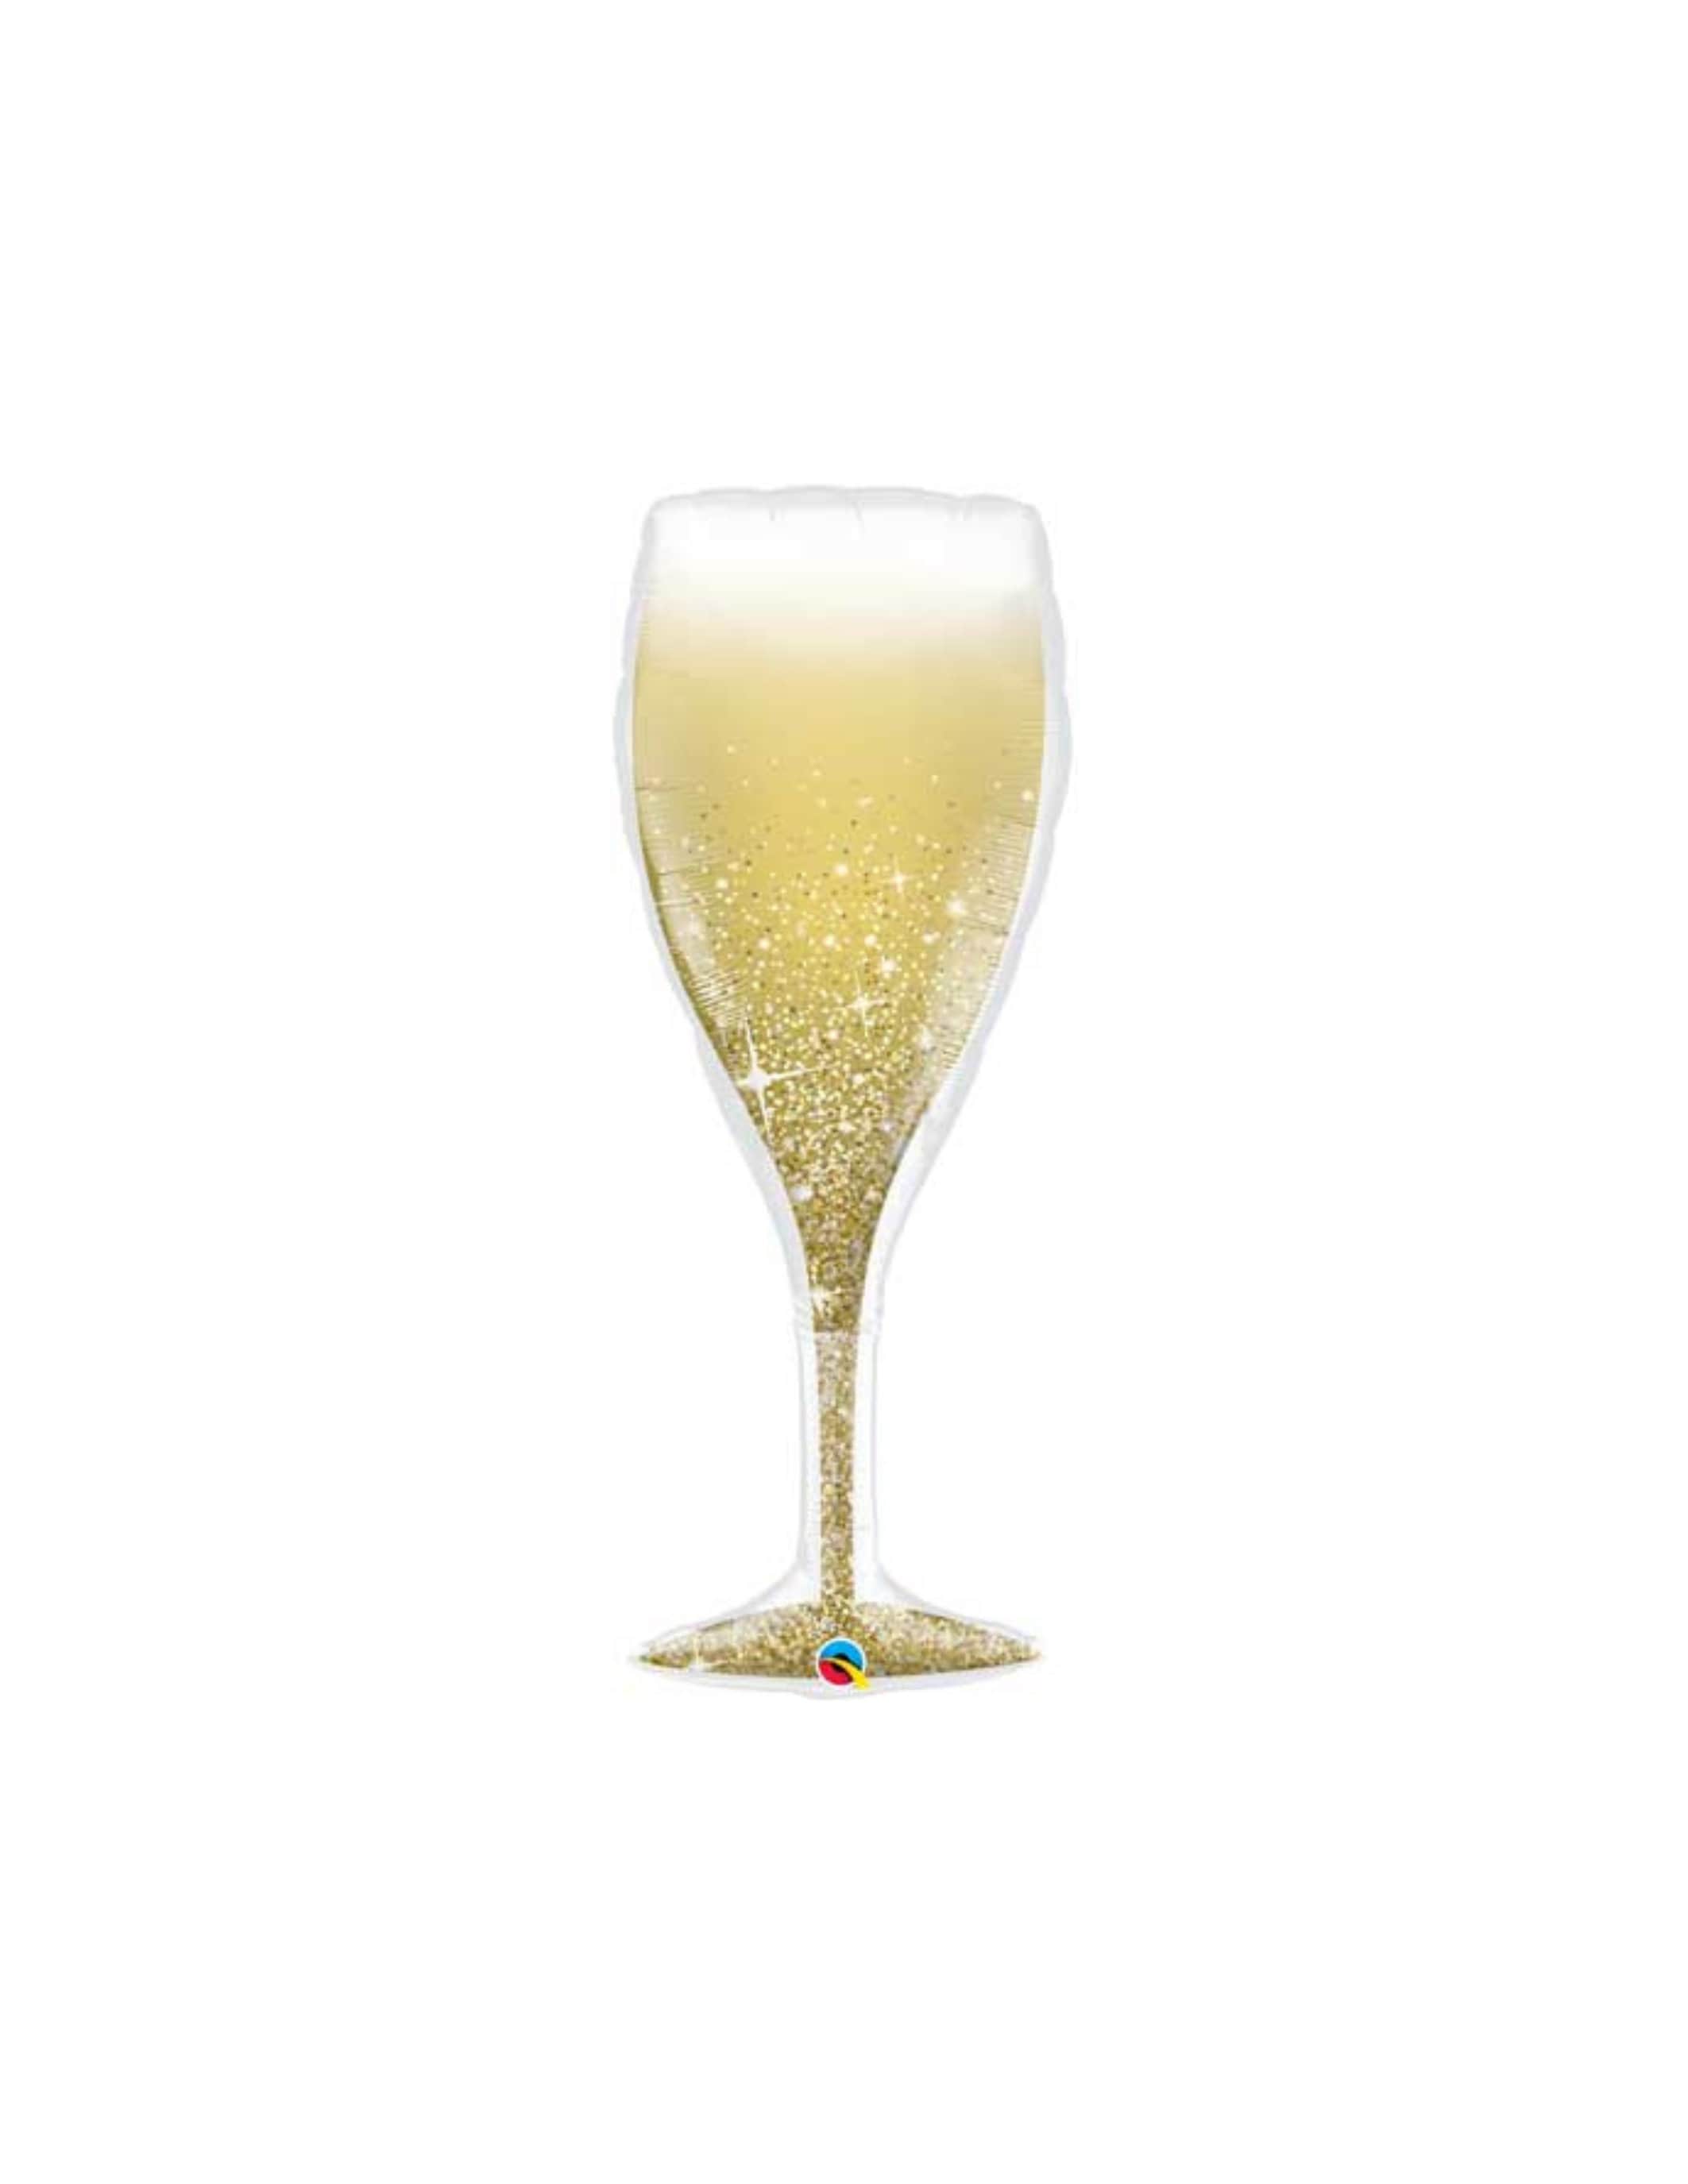 Big Betty - Premium Giant Champagne Glass, Holds a Full 750ml Bottle of  Champagne, Fun Idea for Cele…See more Big Betty - Premium Giant Champagne